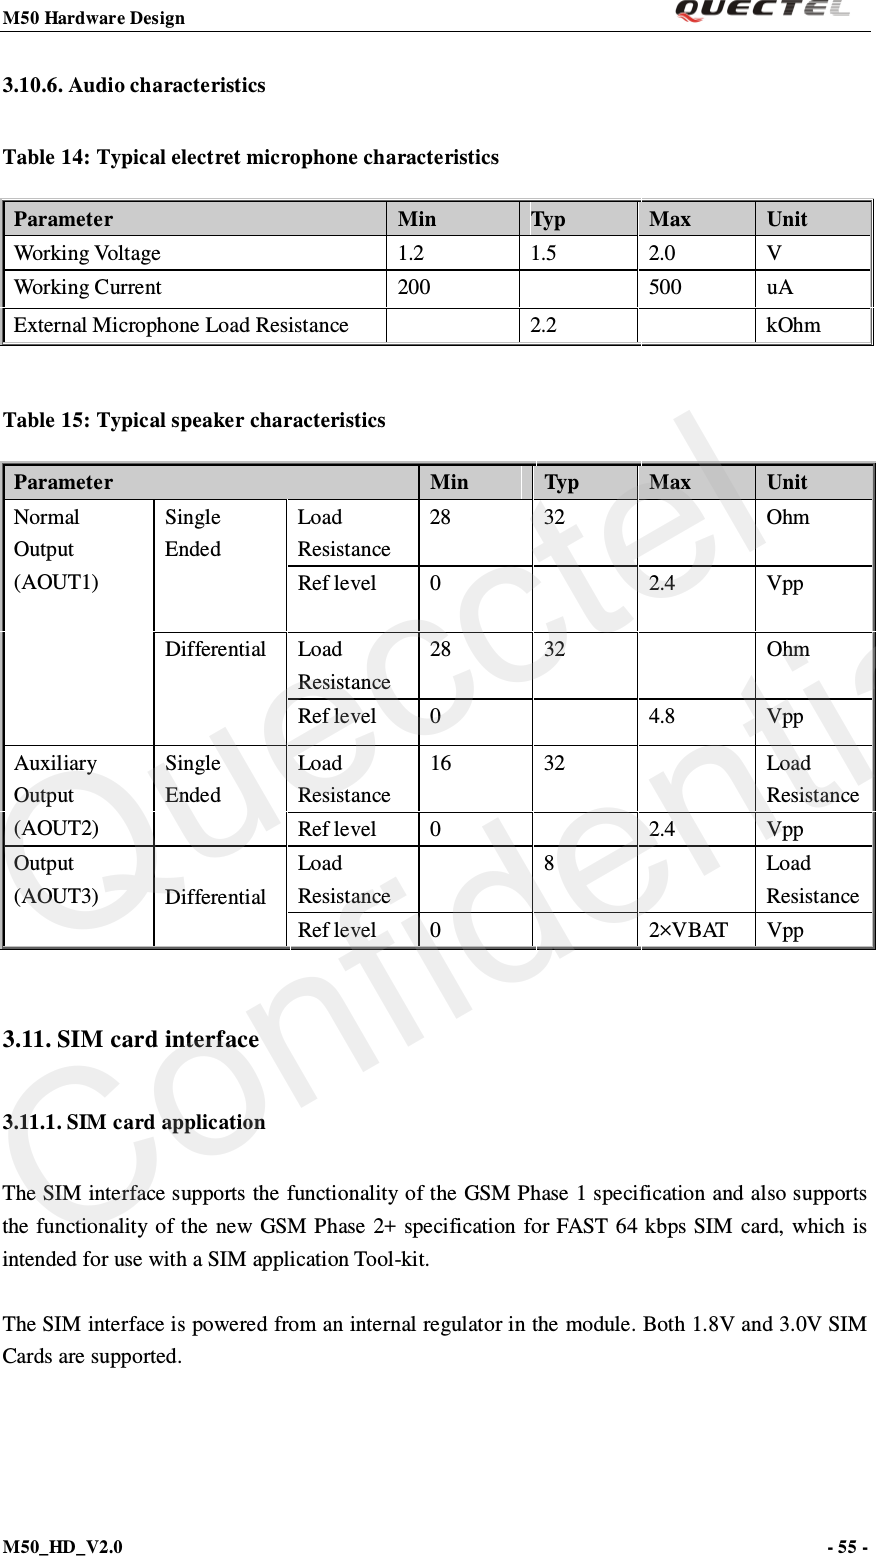 M50 Hardware Design                                                                M50_HD_V2.0                                                                      - 55 -   3.10.6. Audio characteristics Table 14: Typical electret microphone characteristics Parameter Min Typ Max Unit Working Voltage 1.2 1.5 2.0  V Working Current 200    500 uA External Microphone Load Resistance    2.2    kOhm  Table 15: Typical speaker characteristics Parameter Min Typ Max Unit Normal Output (AOUT1) Single Ended   Load Resistance 28  32    Ohm Ref level  0    2.4 Vpp  Differential  Load Resistance 28  32    Ohm Ref level  0    4.8 Vpp Auxiliary Output (AOUT2) Single Ended   Load Resistance 16  32    Load Resistance Ref level  0    2.4 Vpp Output (AOUT3) Differential Load Resistance   8    Load Resistance Ref level  0    2×V B AT  Vpp  3.11. SIM card interface 3.11.1. SIM card application The SIM interface supports the functionality of the GSM Phase 1 specification and also supports the functionality of the new GSM Phase 2+ specification for FAST 64 kbps SIM card, which is intended for use with a SIM application Tool-kit.  The SIM interface is powered from an internal regulator in the module. Both 1.8V and 3.0V SIM Cards are supported.   Quecctel Confidential